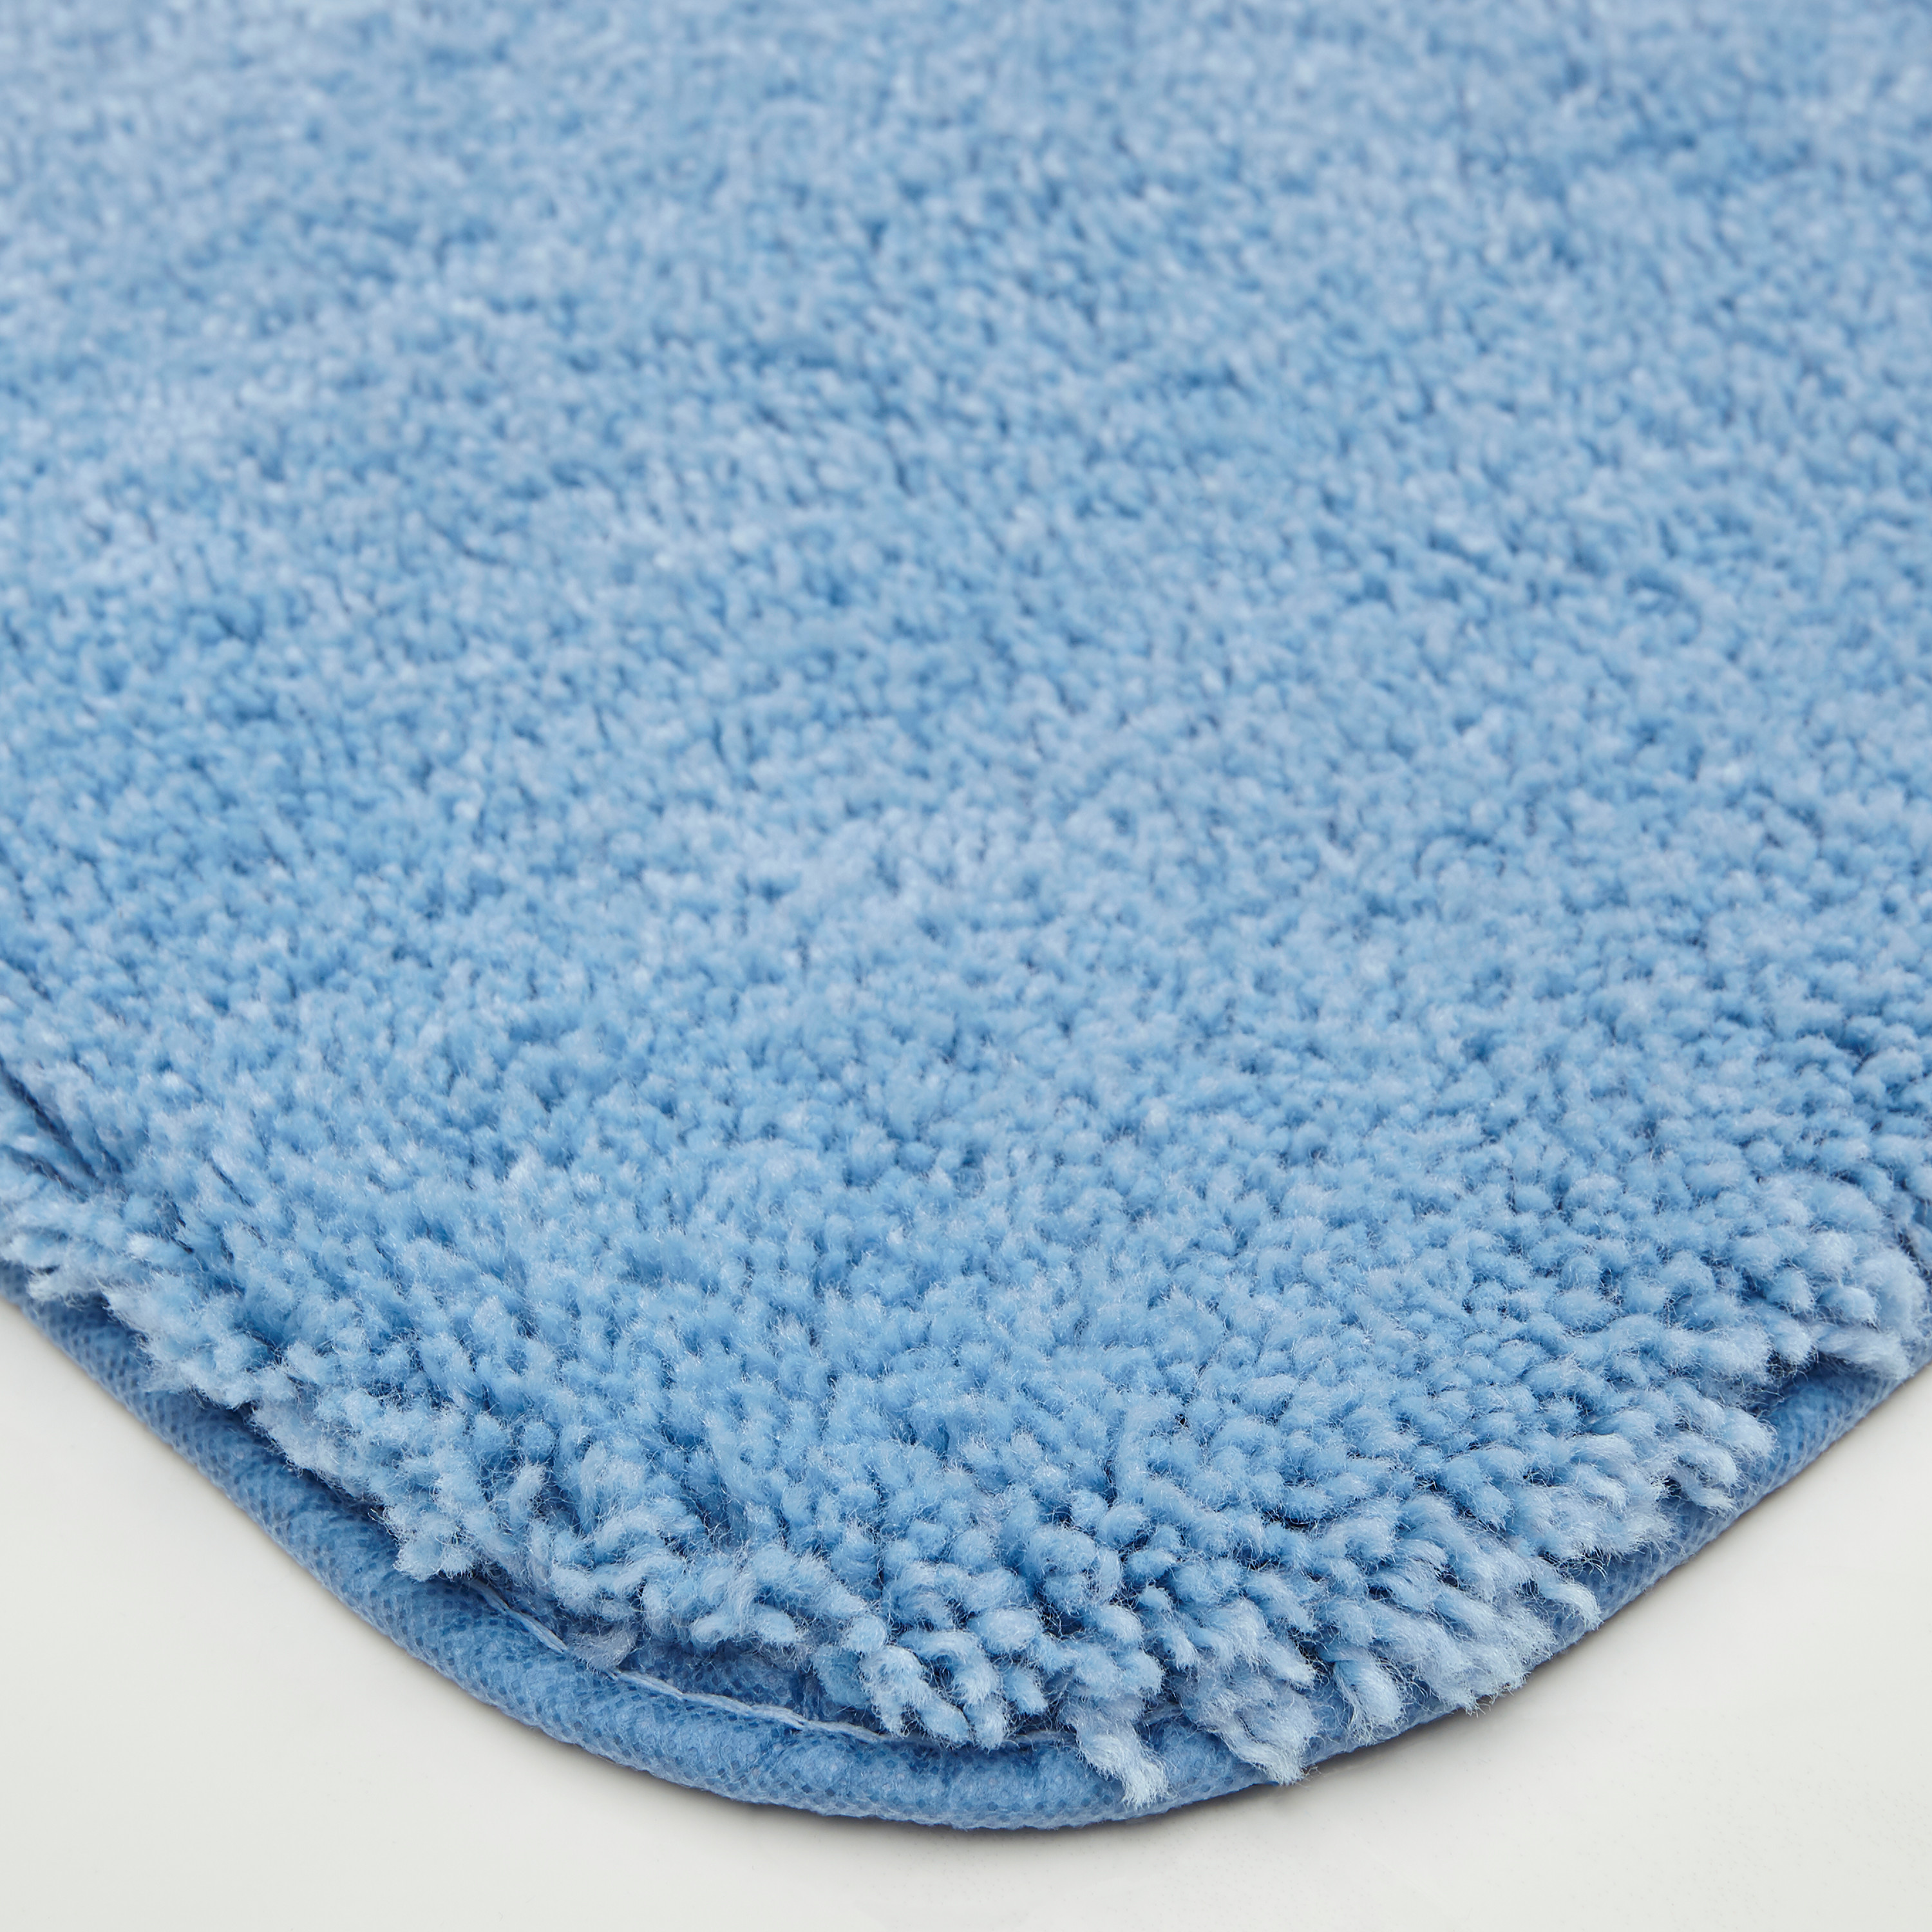 Mohawk Home Pure Perfection Nylon Bath Rug Scatter, Light Blue 1'5" x 2' - image 3 of 4